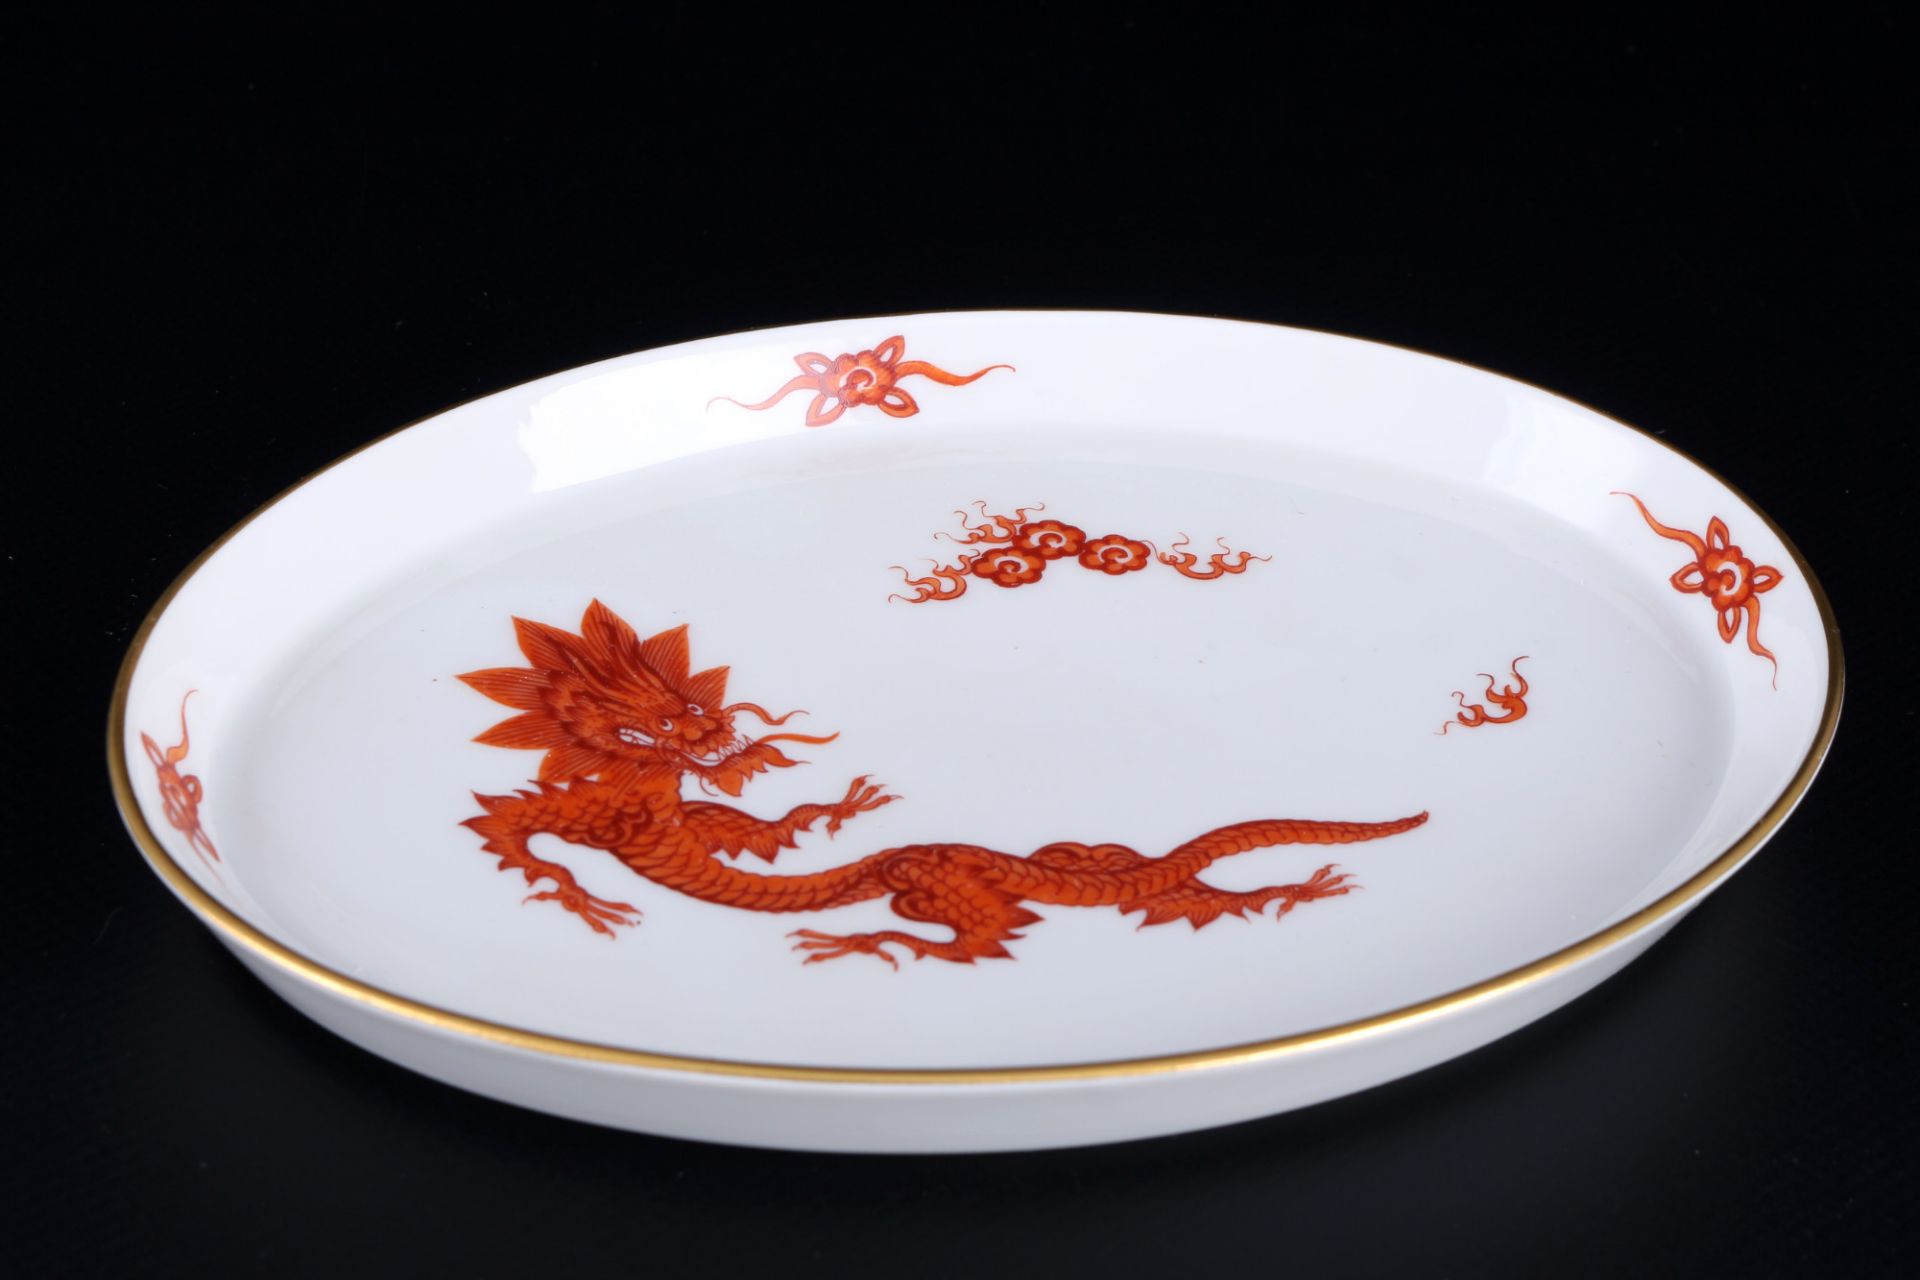 Meissen Red Ming Dragon coffee service for 6 persons 1st choice, Kaffeeservice für 6 Personen 1.Wahl - Image 5 of 6